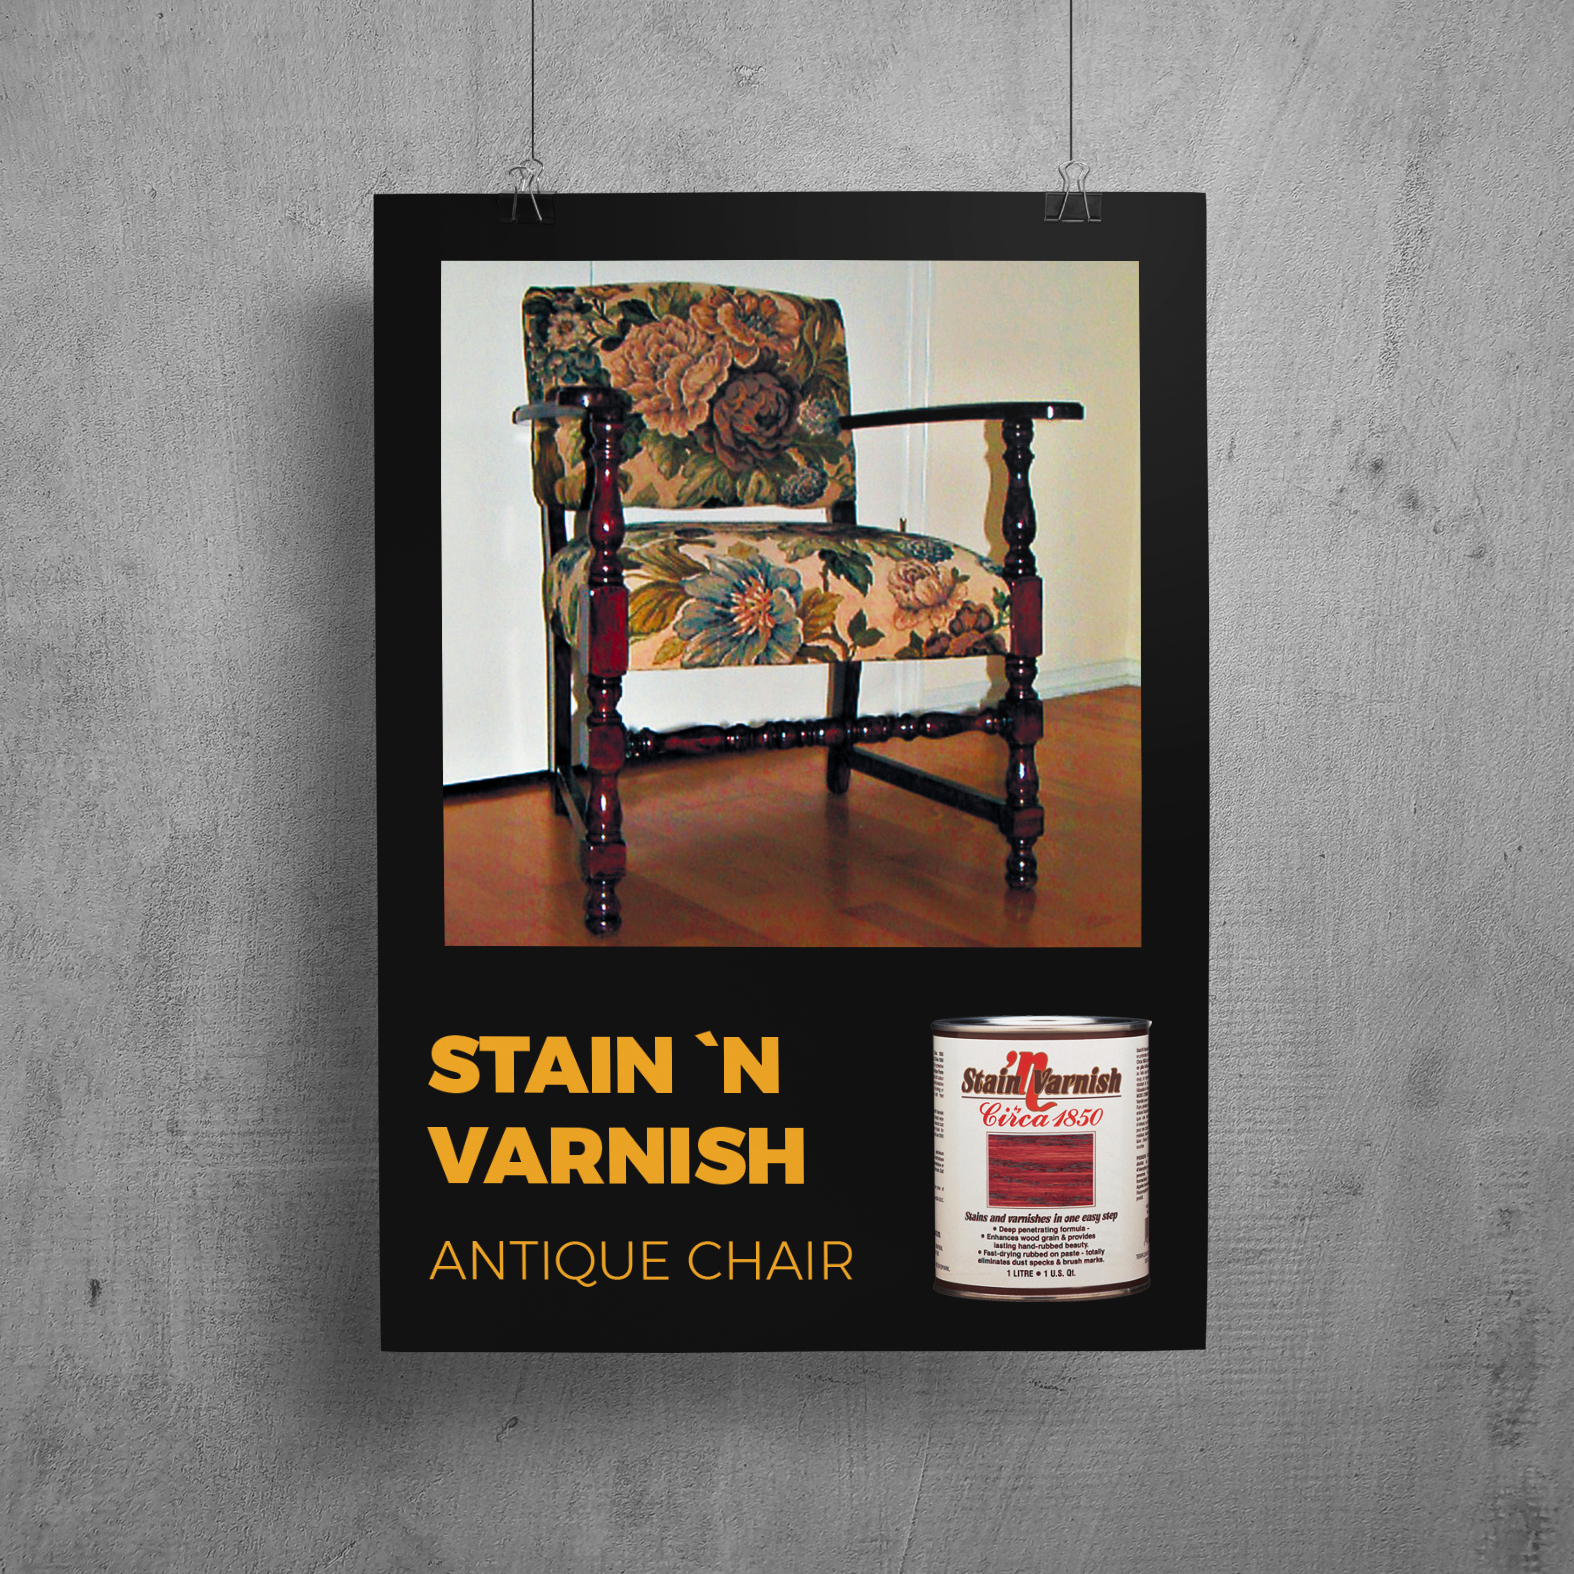 Stain 'n Varnish  Antique Chair